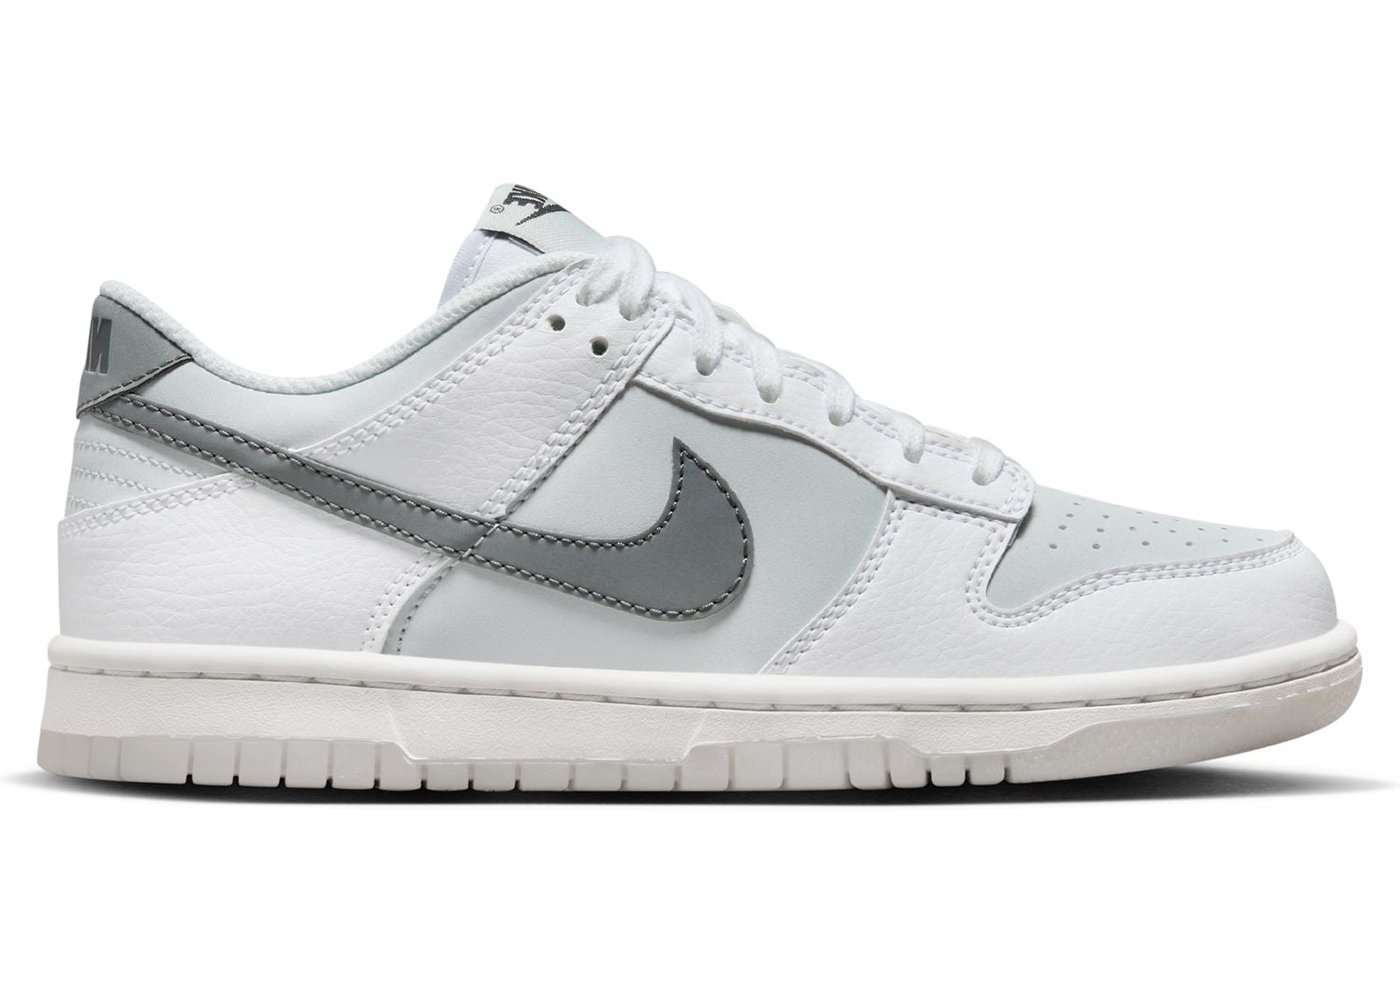 Nike Dunk Low Reflective Swoosh White (GS) キッズ - FV0365-100 ...